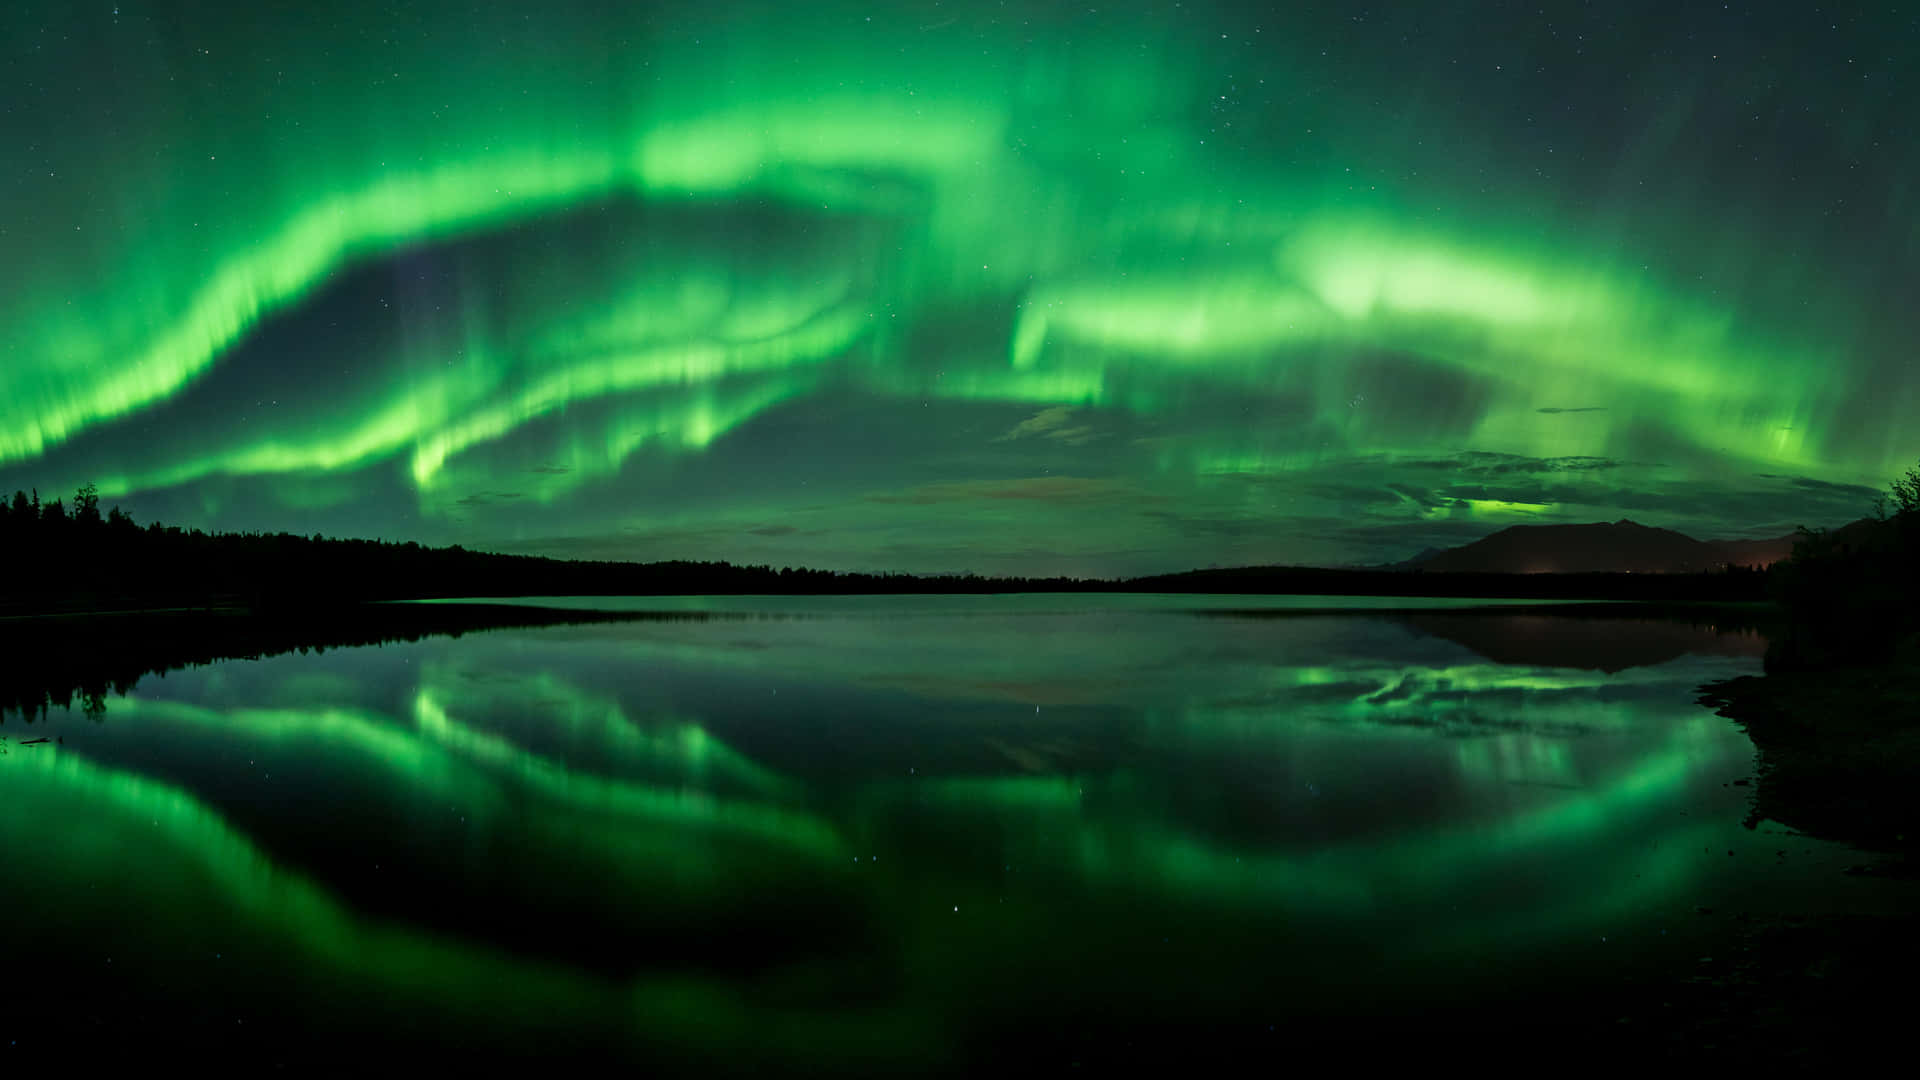 "Experience the Magic of the Aurora"